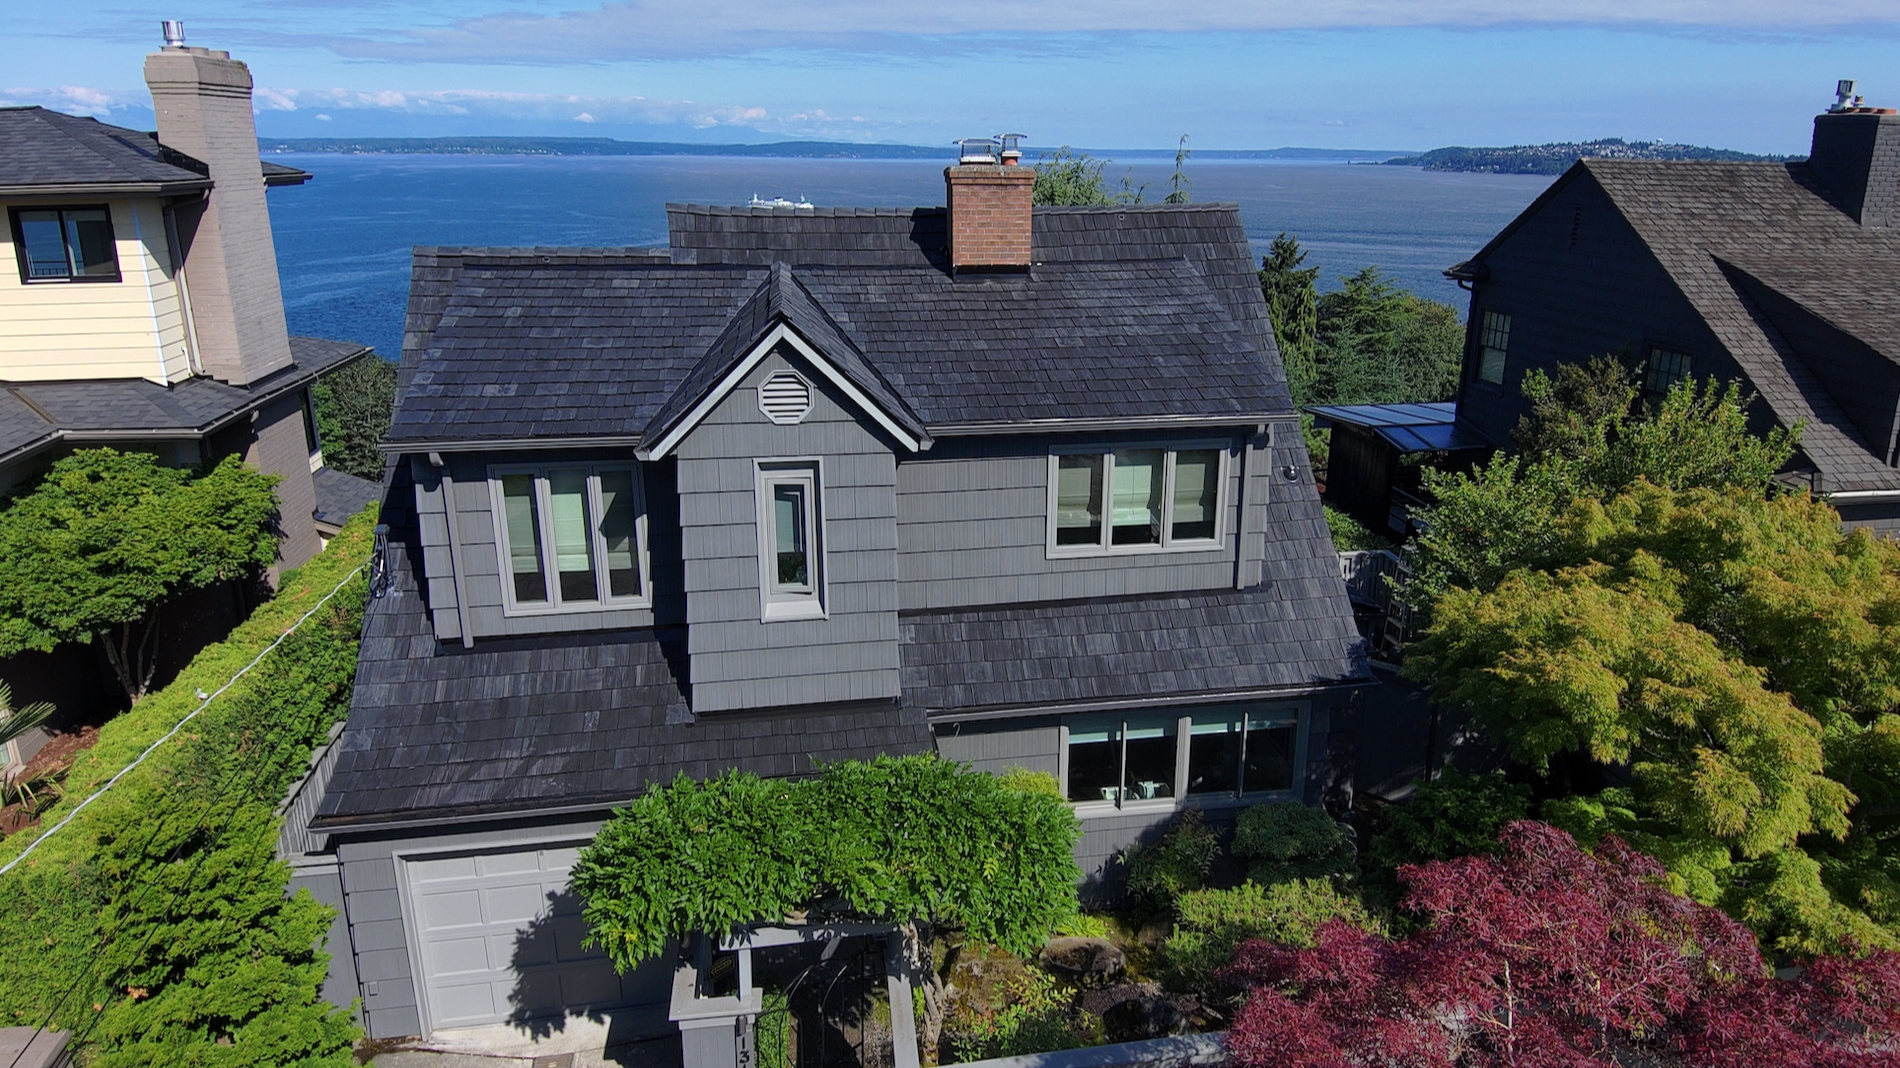 Get A Composite Roof Replacement in Kirkland With This Local Roof Installer